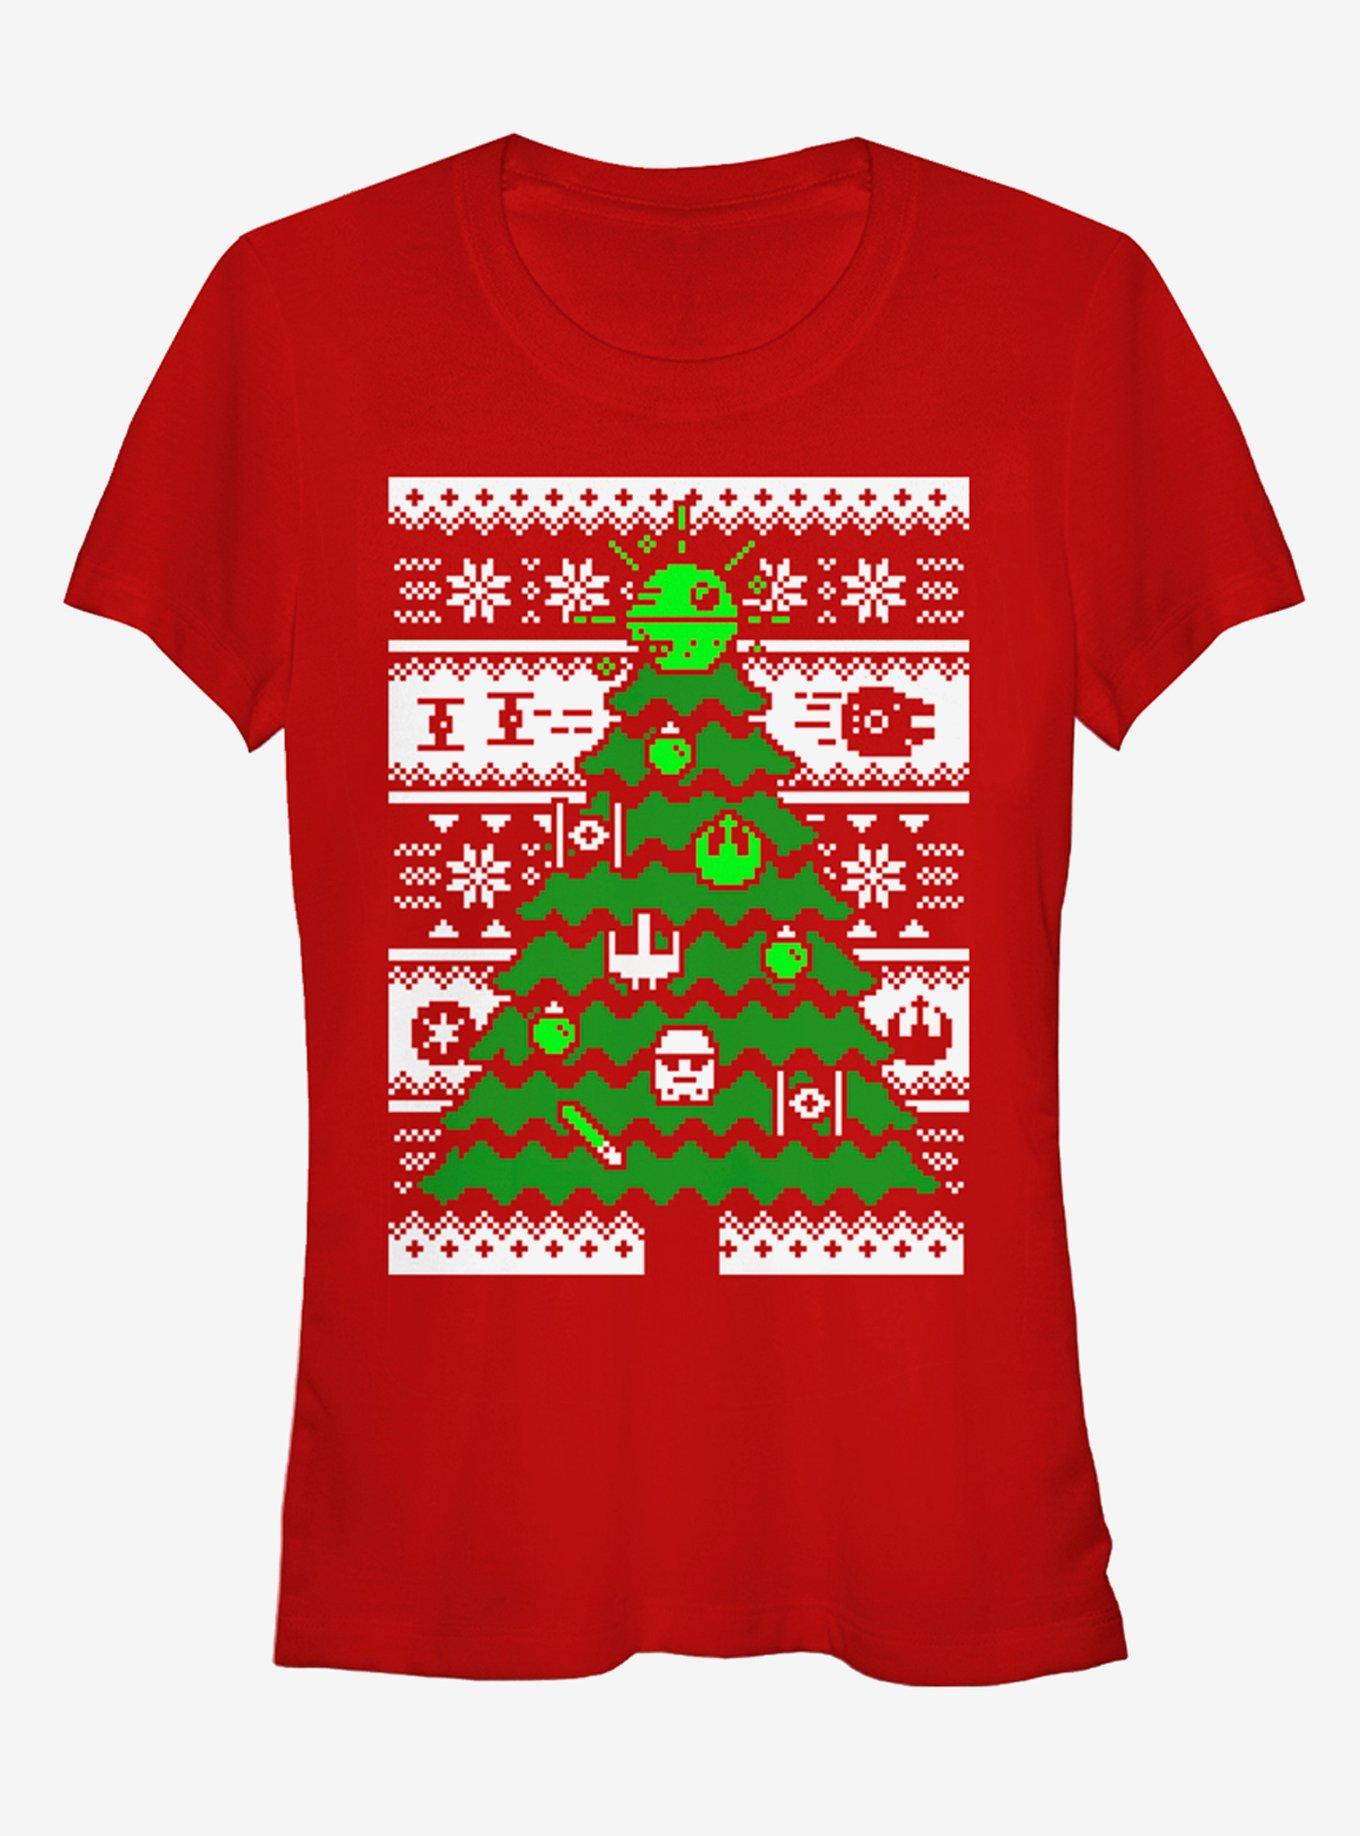 Star Wars Ugly Christmas Sweater Tree Girls T-Shirt, RED, hi-res